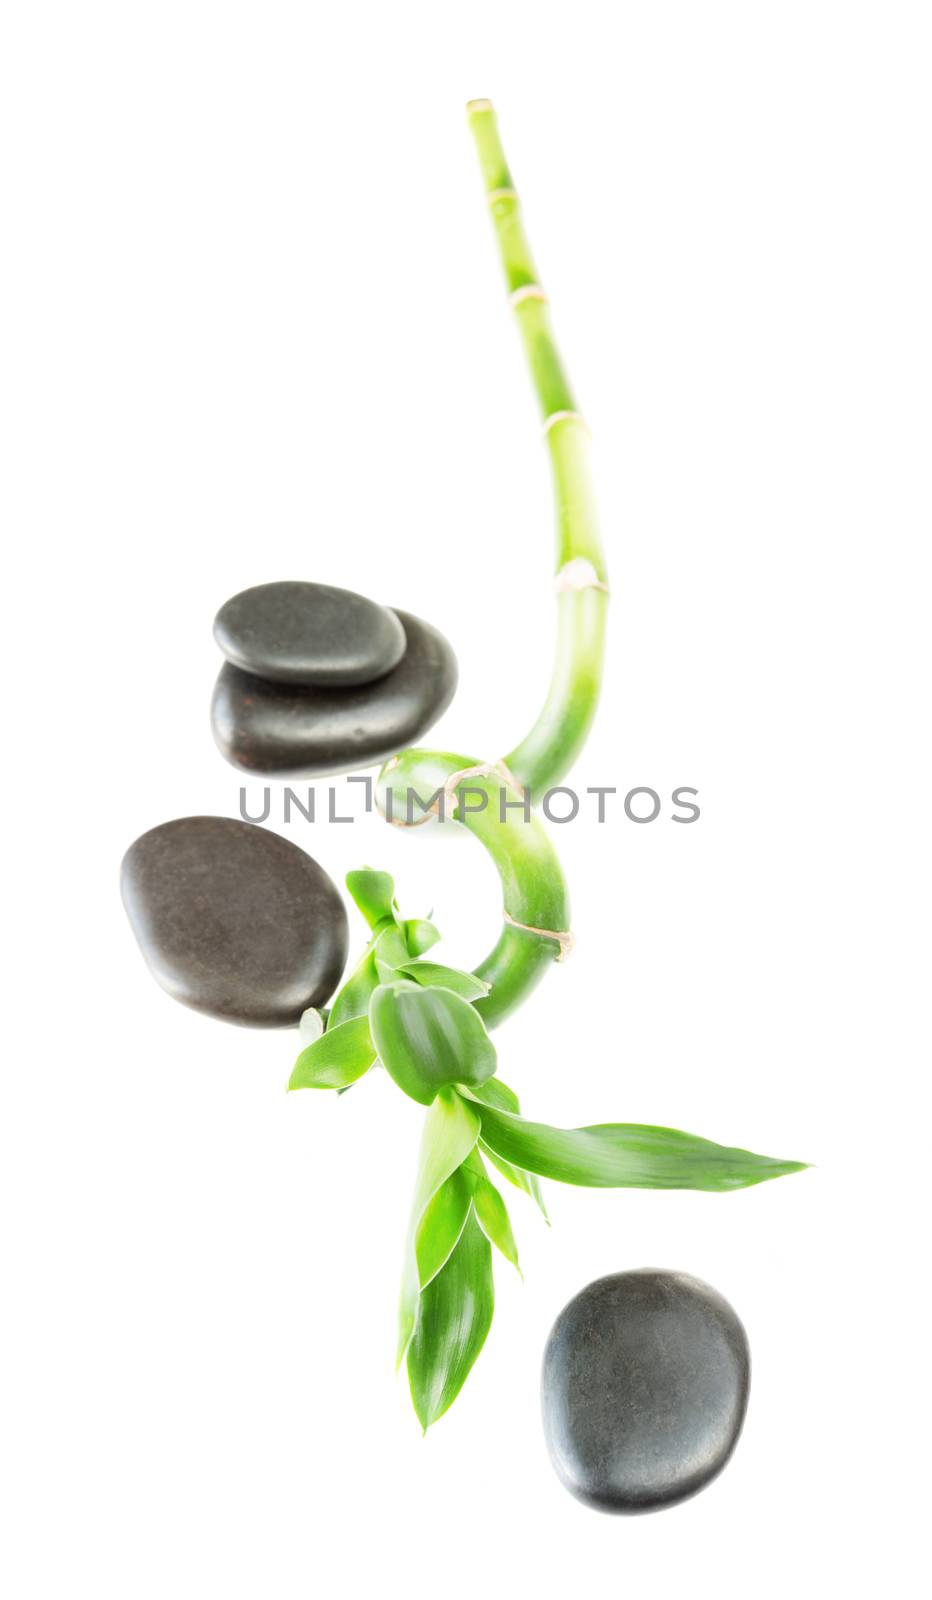 Spa concept: stem of Lucky Bamboo (Dracaena Sanderiana) with green leaves, twisted into a spiral shape, and three black basalt massage stones, isolated on white background